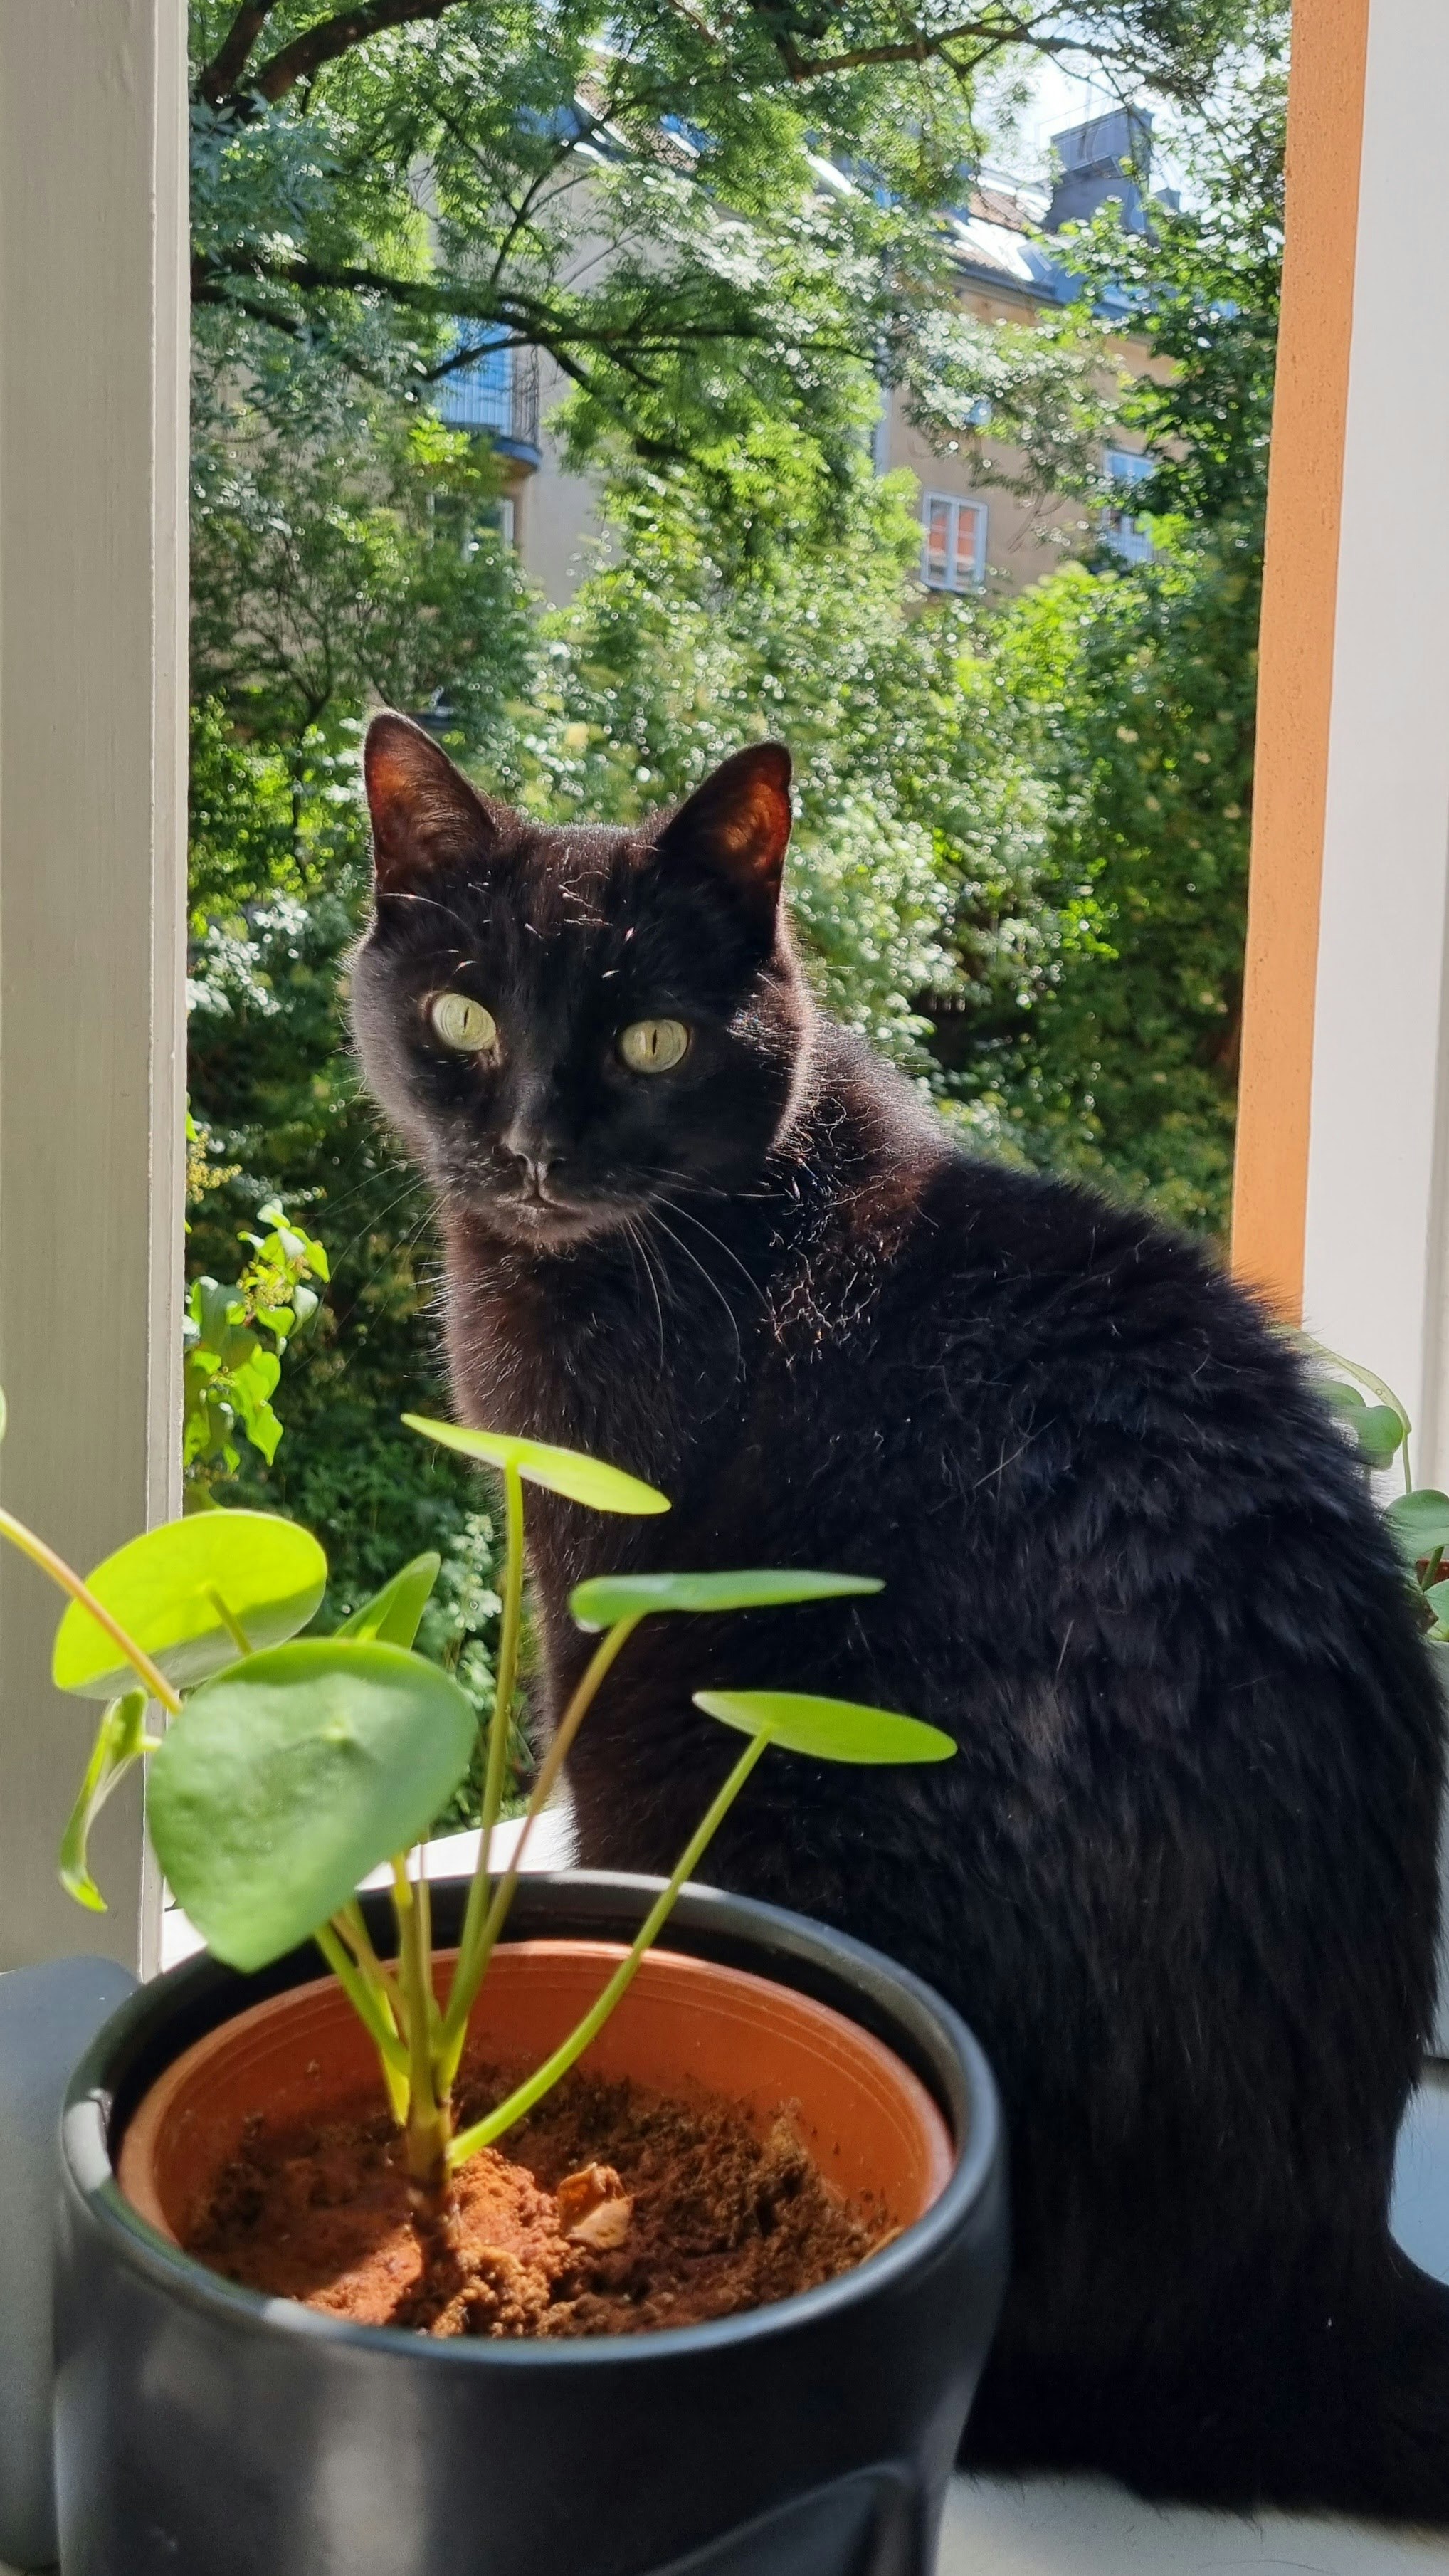 Black cat sitting in front of a window with trees outside